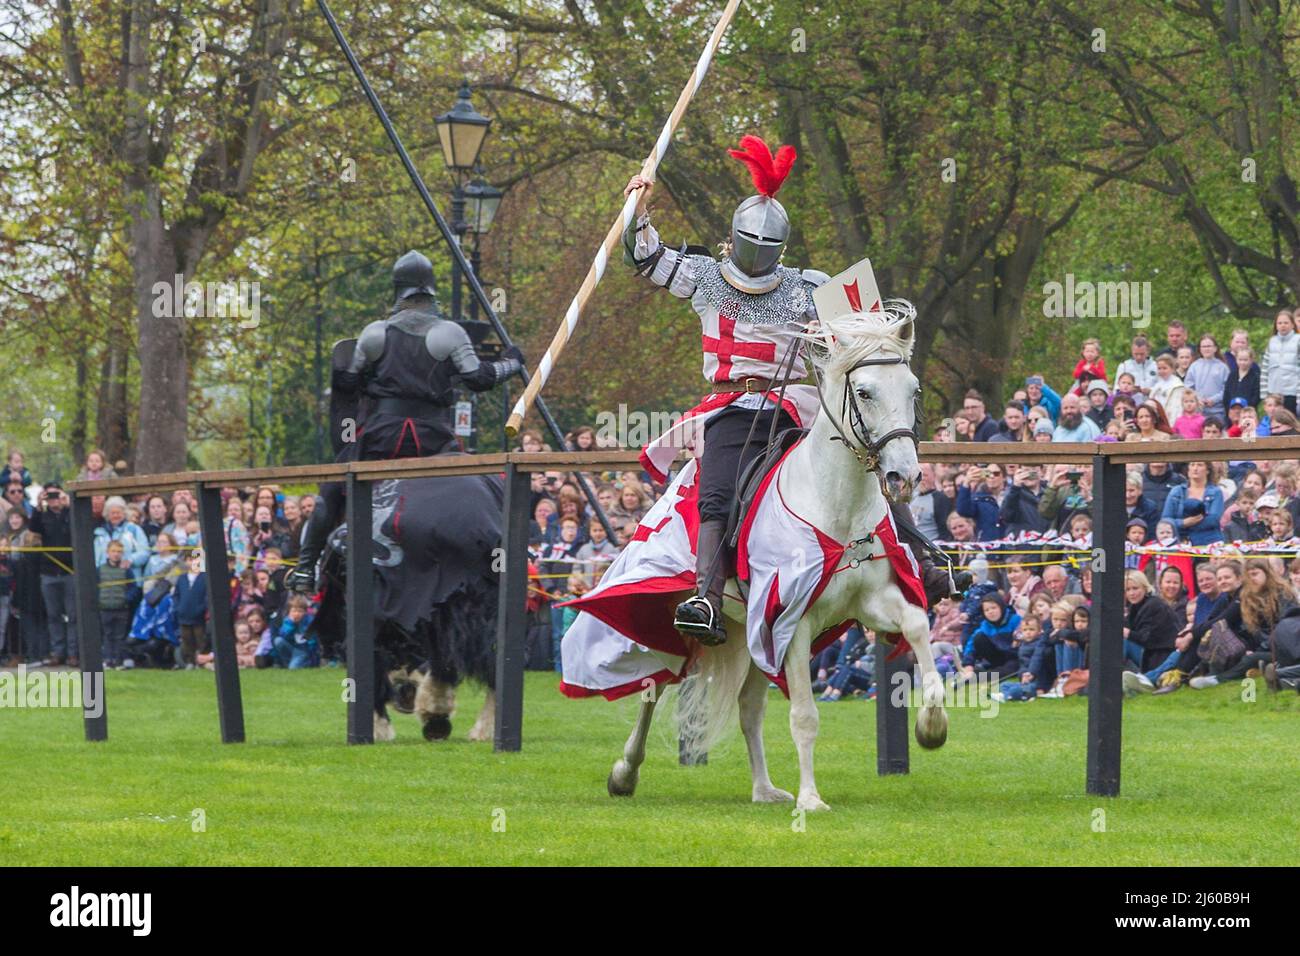 Knights on horseback joust while wearing body armour during The Grand Medieval Joust at Tamworth Castle on St. George's day. Stock Photo